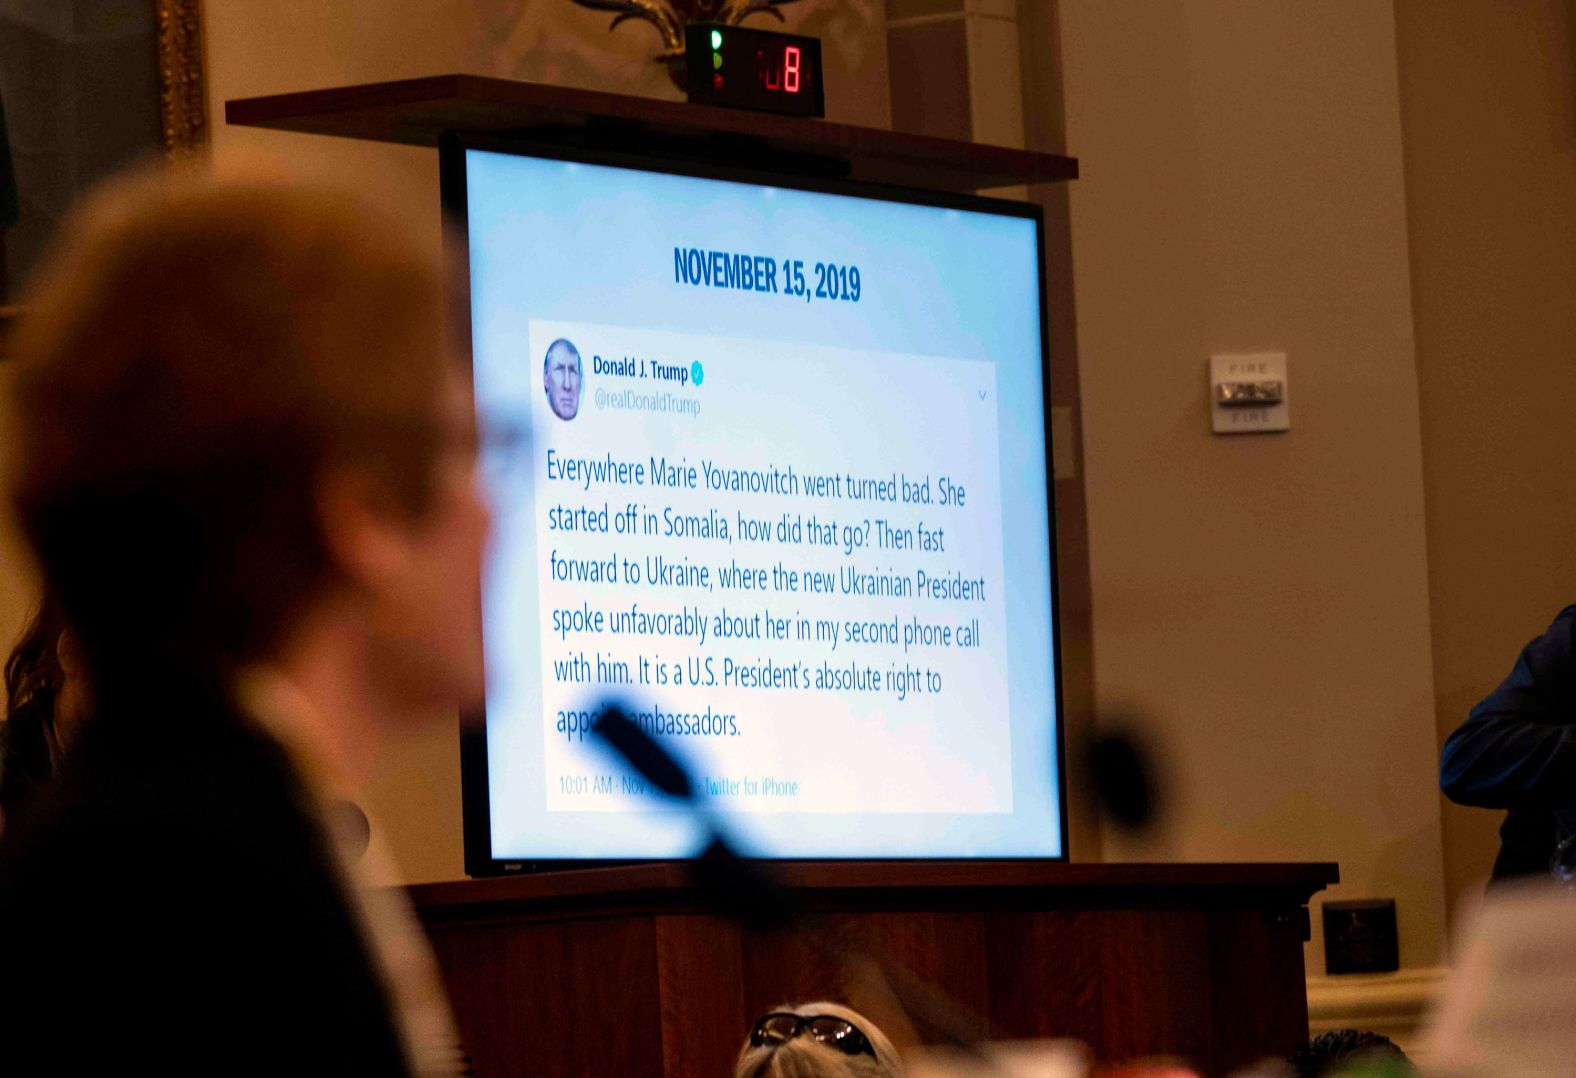 A tweet from President Trump is displayed on a video monitor as Marie Yovanovitch, the former United States ambassador to Ukraine, appears before the House Intelligence Committee on November 15. <a href="https://www.cnn.com/2019/11/15/politics/public-impeachment-hearings-day-2/index.html" target="_blank">Yovanovitch</a> spent 33 years in the State Department, serving both Republican and Democratic presidents. Trump removed her in May.